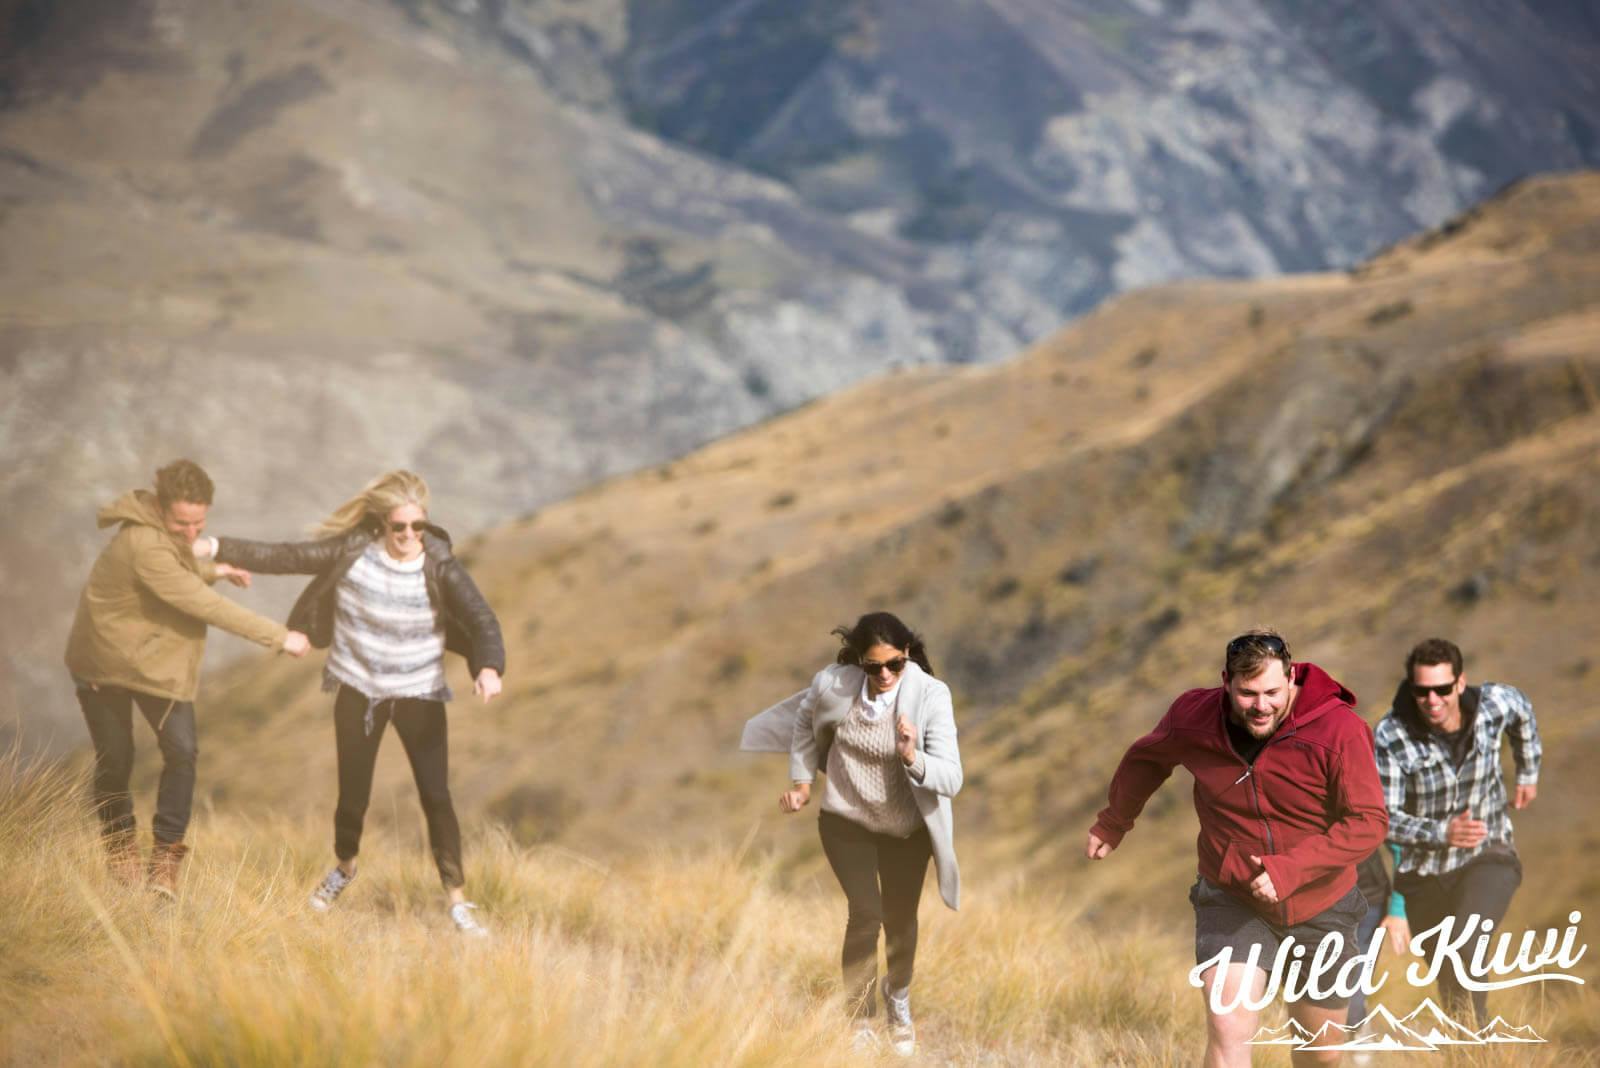 See New Zealand's national parks on a Wild Kiwi tour - Check out amazing mountain views